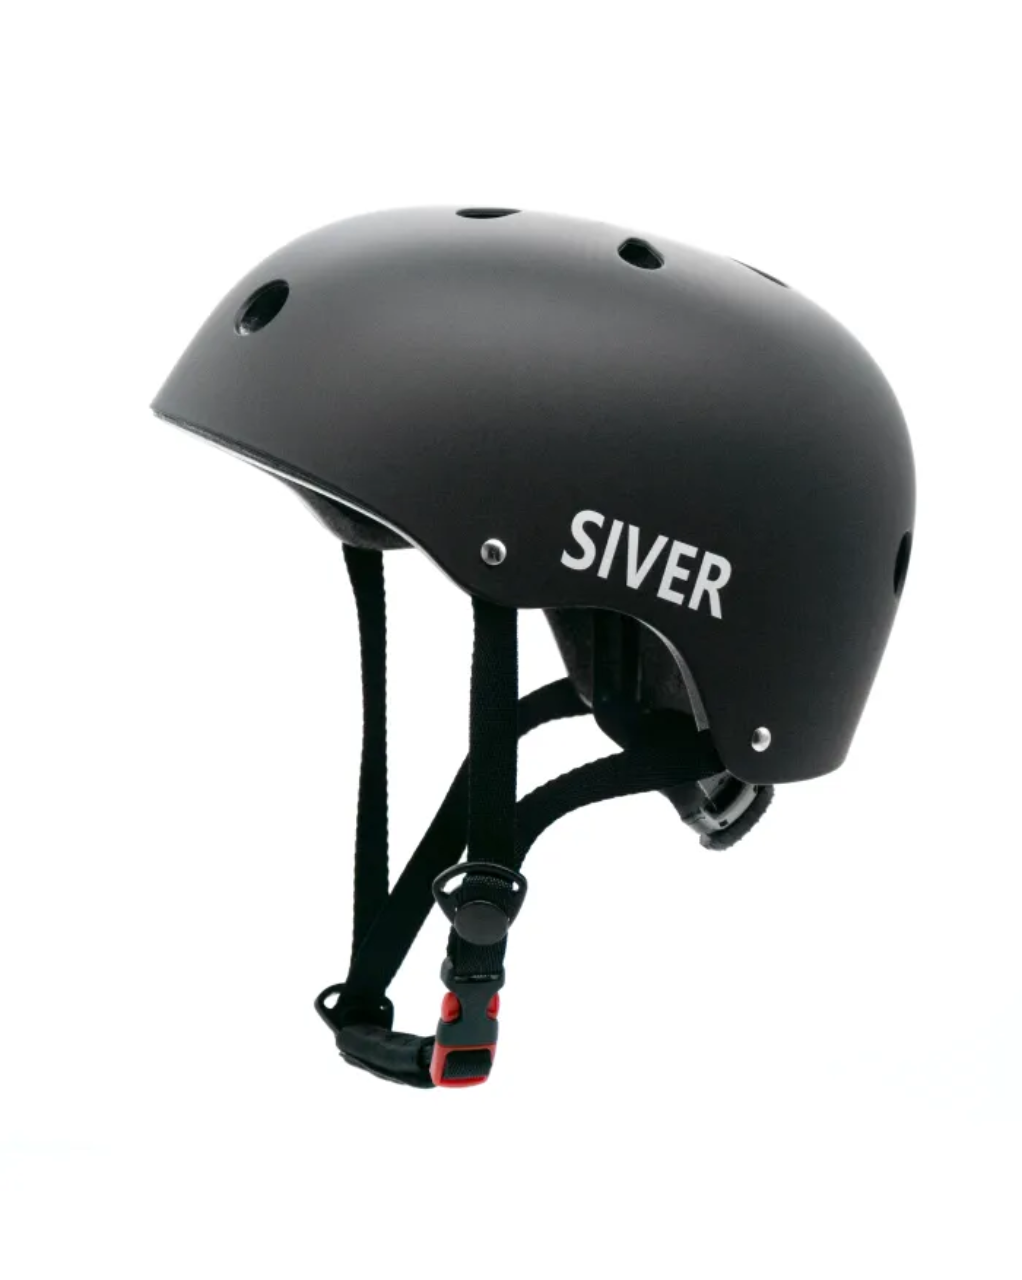 Kask rowerowy SIVER